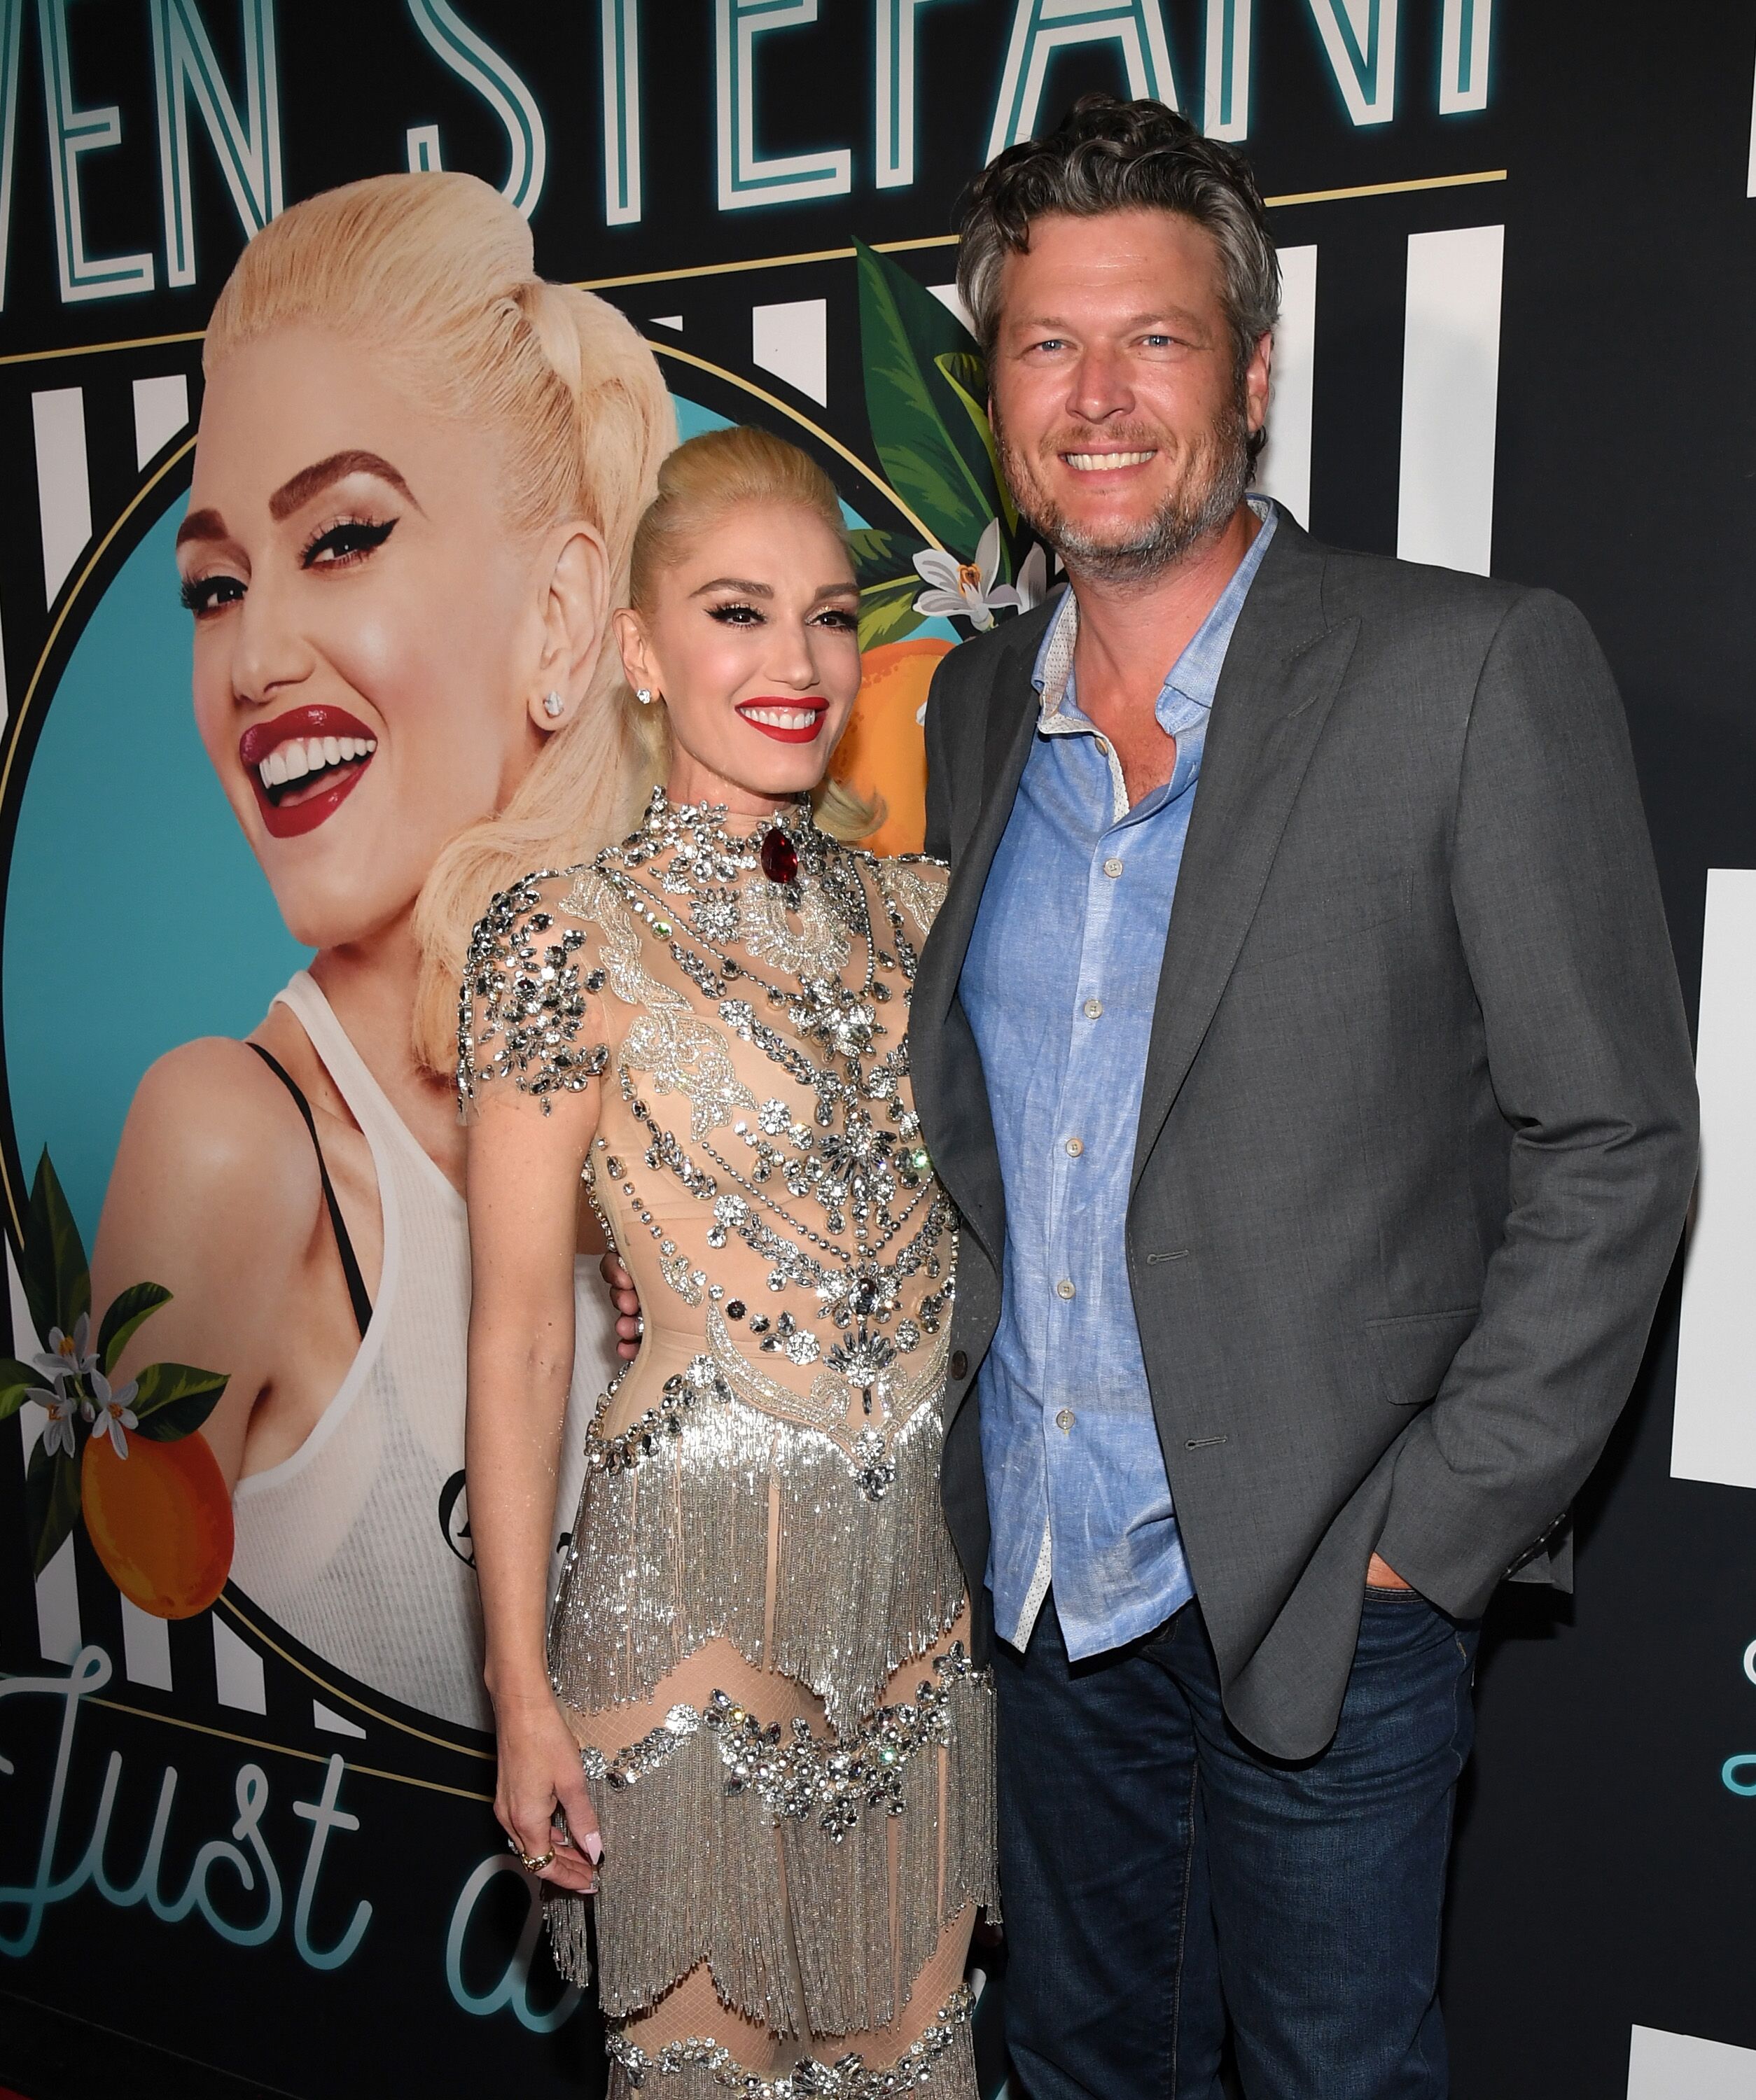 Gwen Stefani and Blake Shelton at the grand opening of her "Gwen Stefani - Just a Girl" residency. | Source: Getty Images